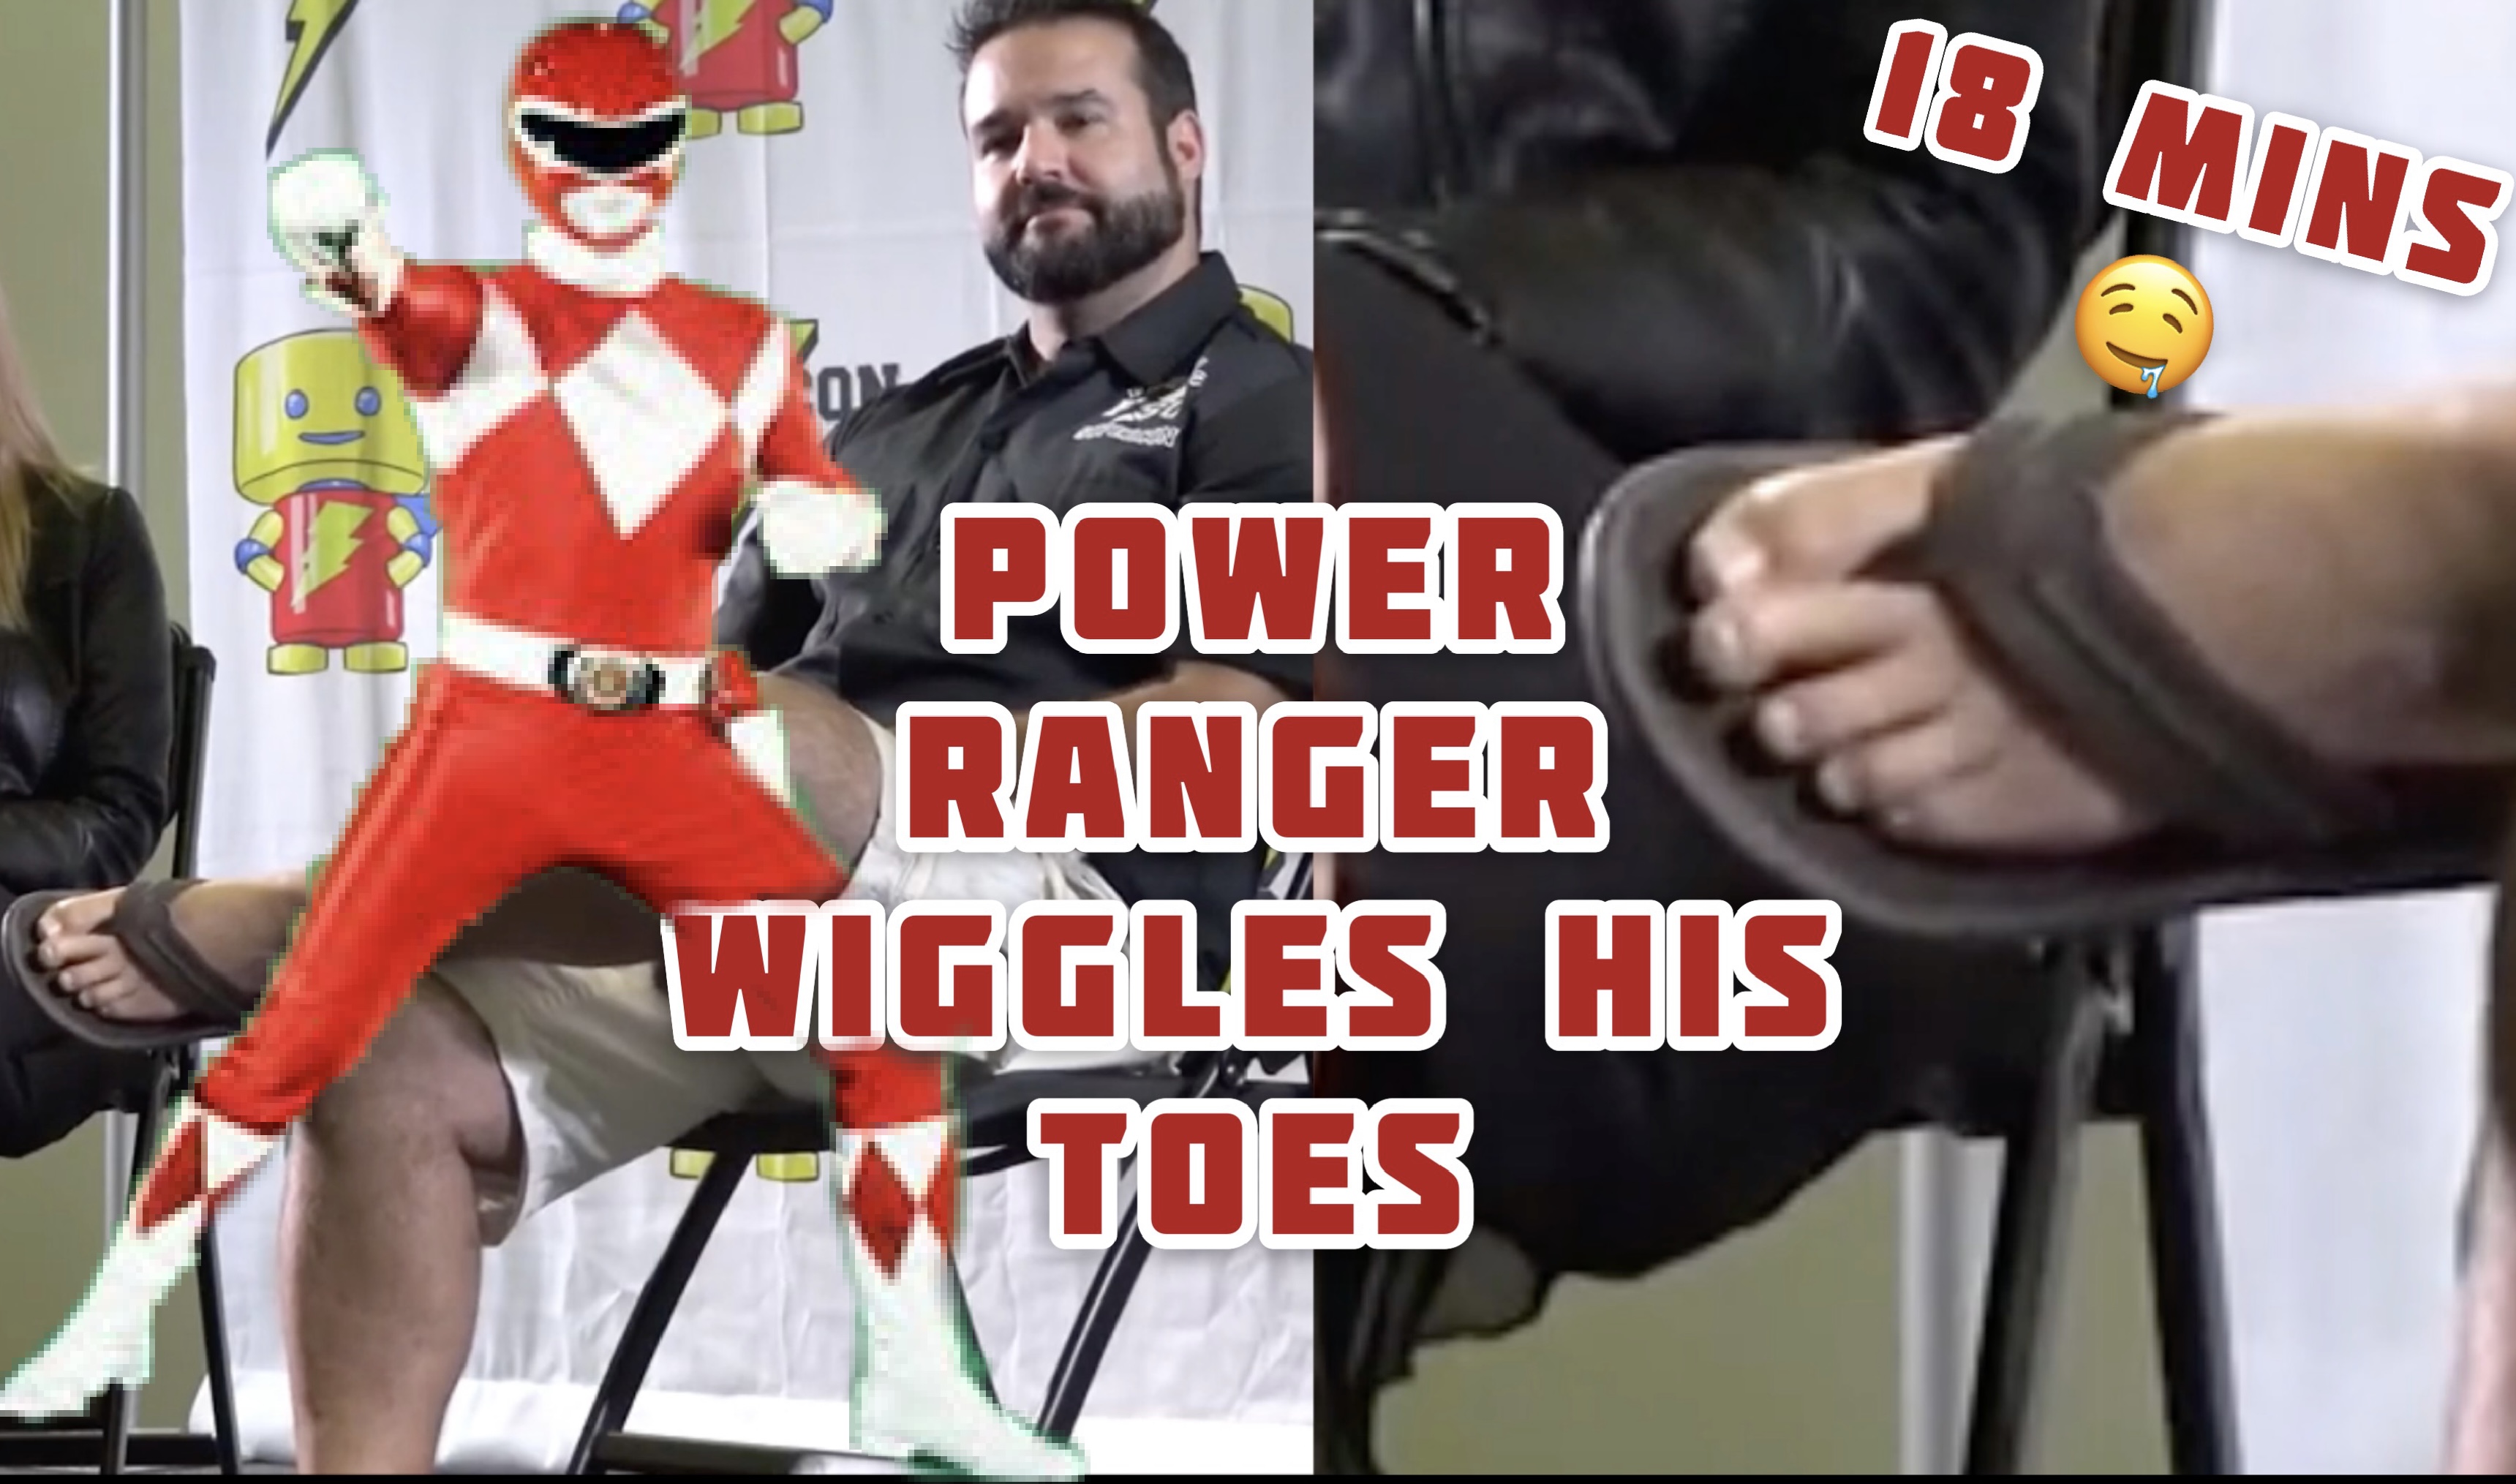 Red Power Ranger Wiggles Toes For 18mins!